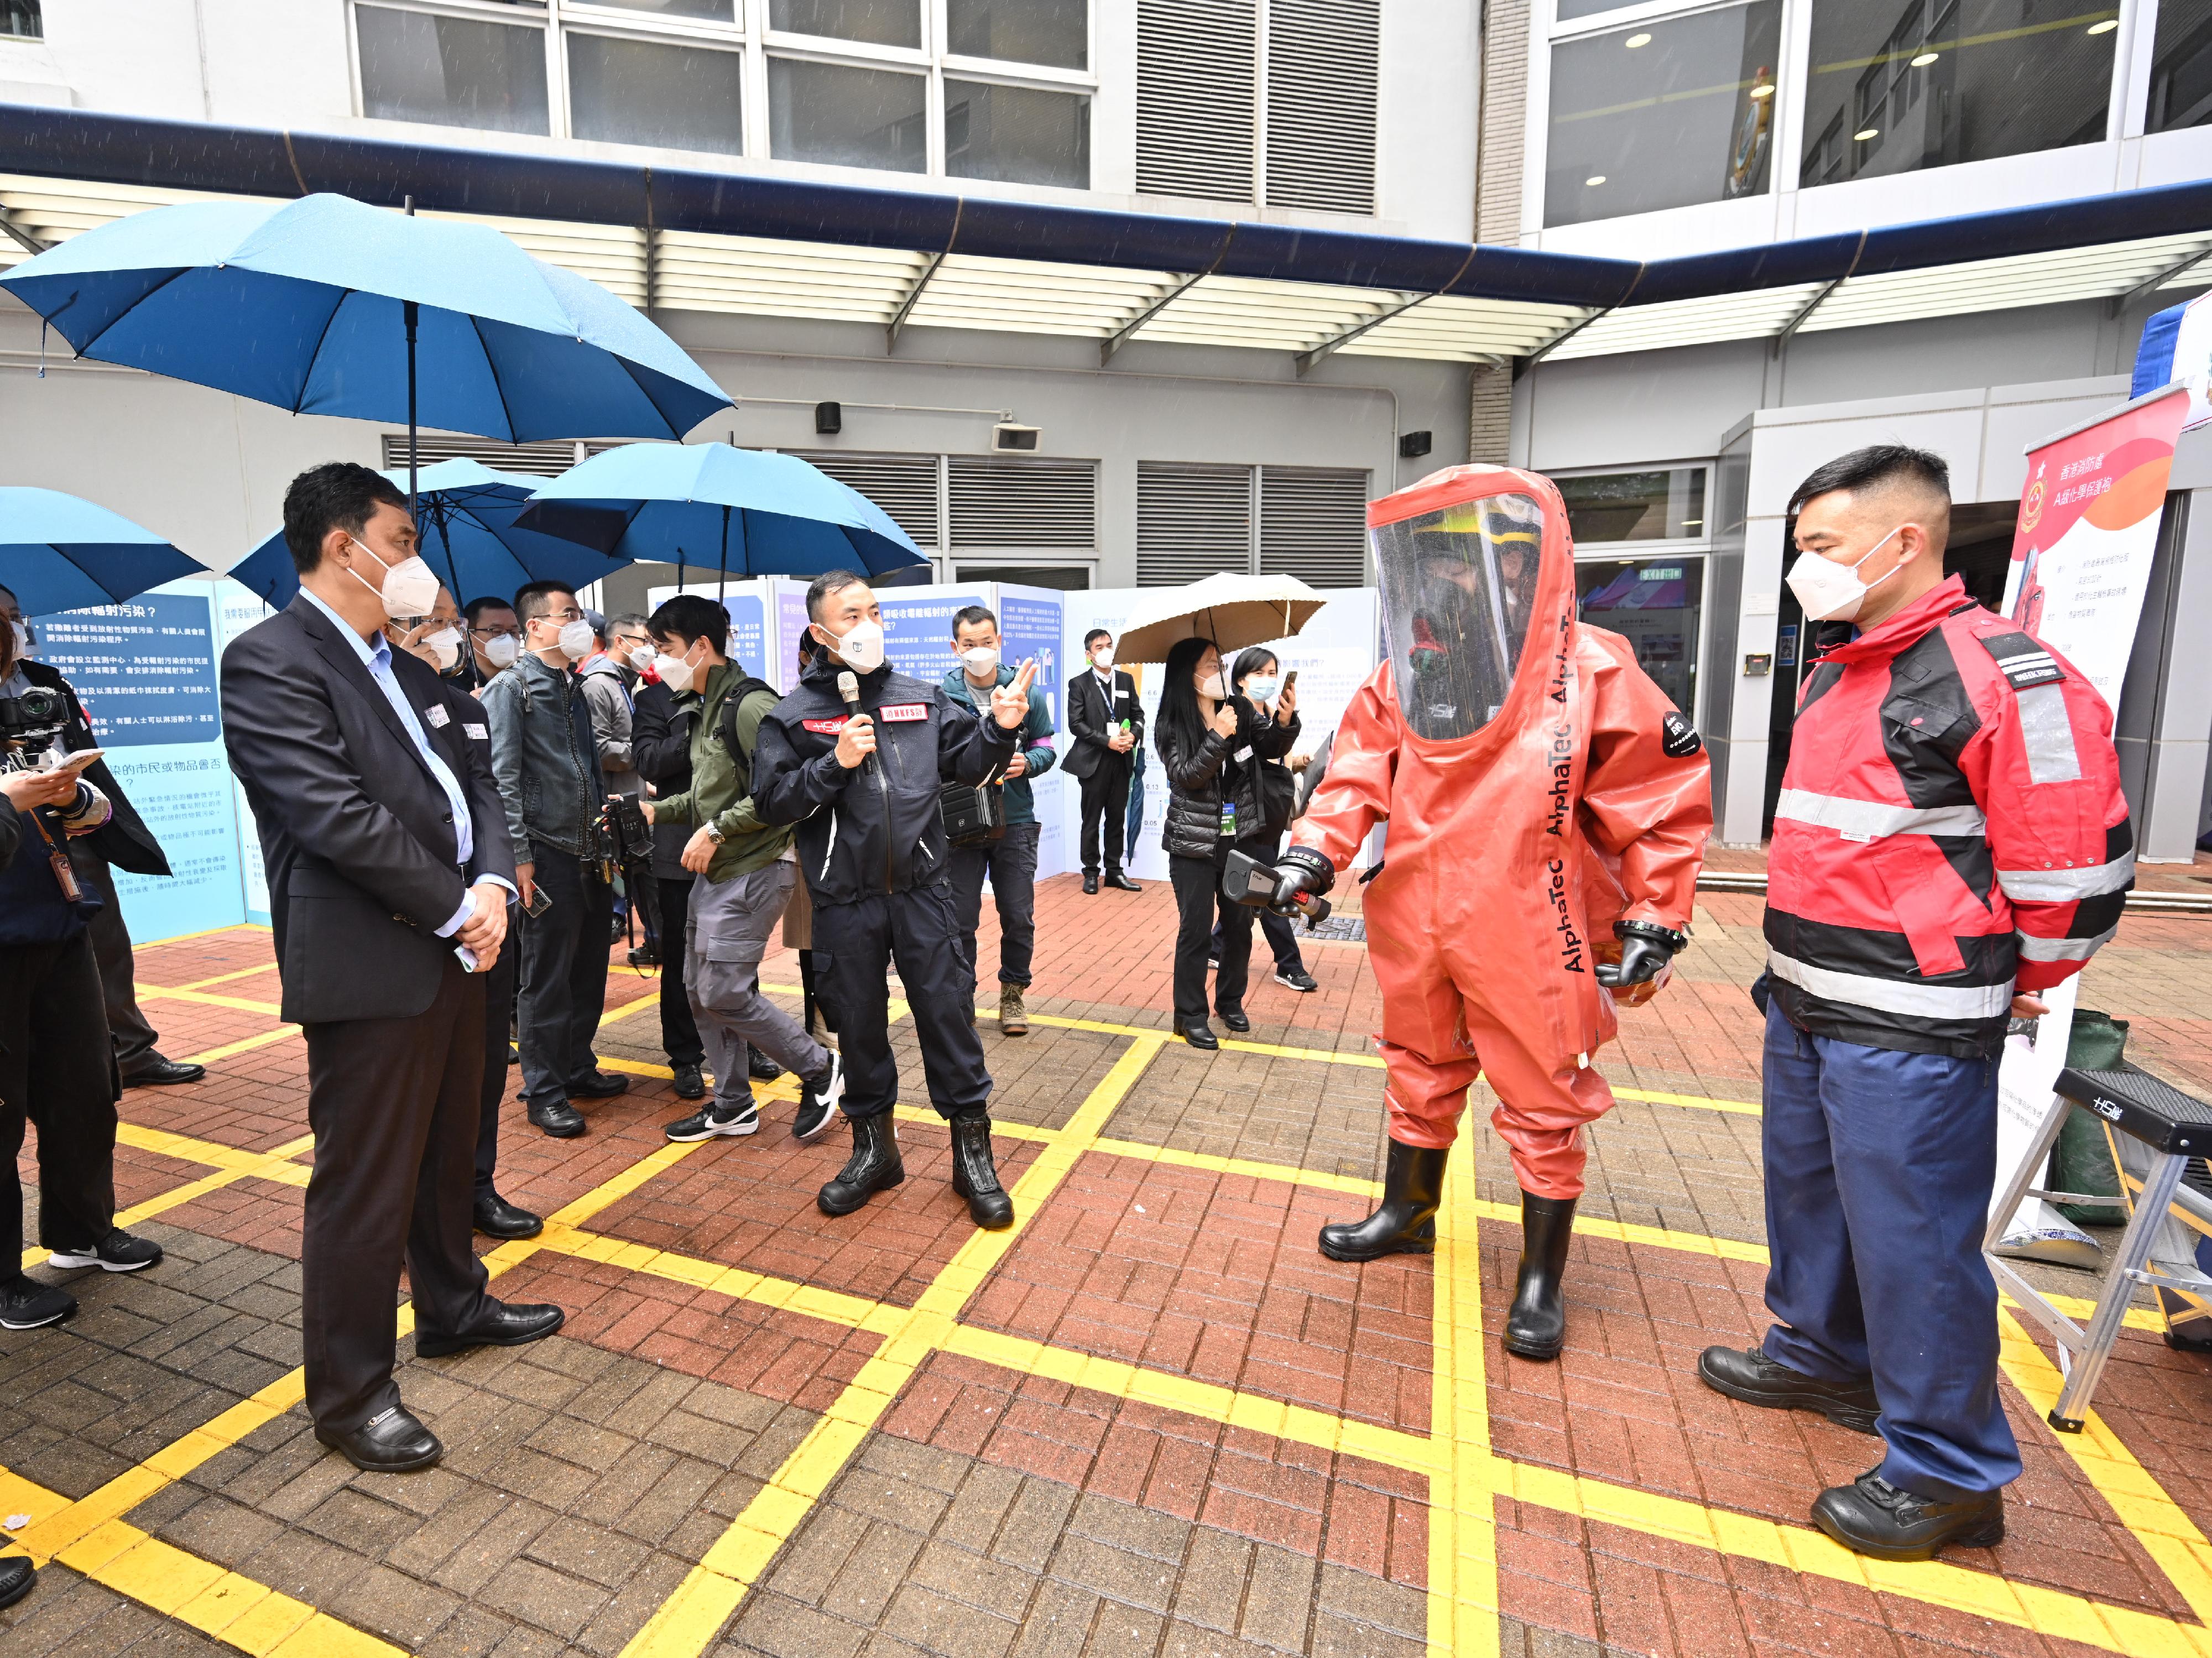 The Government conducted an inter-departmental exercise, "Checkerboard III", today (January 12). Photo shows experts viewing the Fire Services Department's HazMat (hazardous materials) Team exhibiting the Chemical Protection Suit (Level A) which provides the highest degree of protection and is designed for incidents involving toxic gas or unknown chemicals.